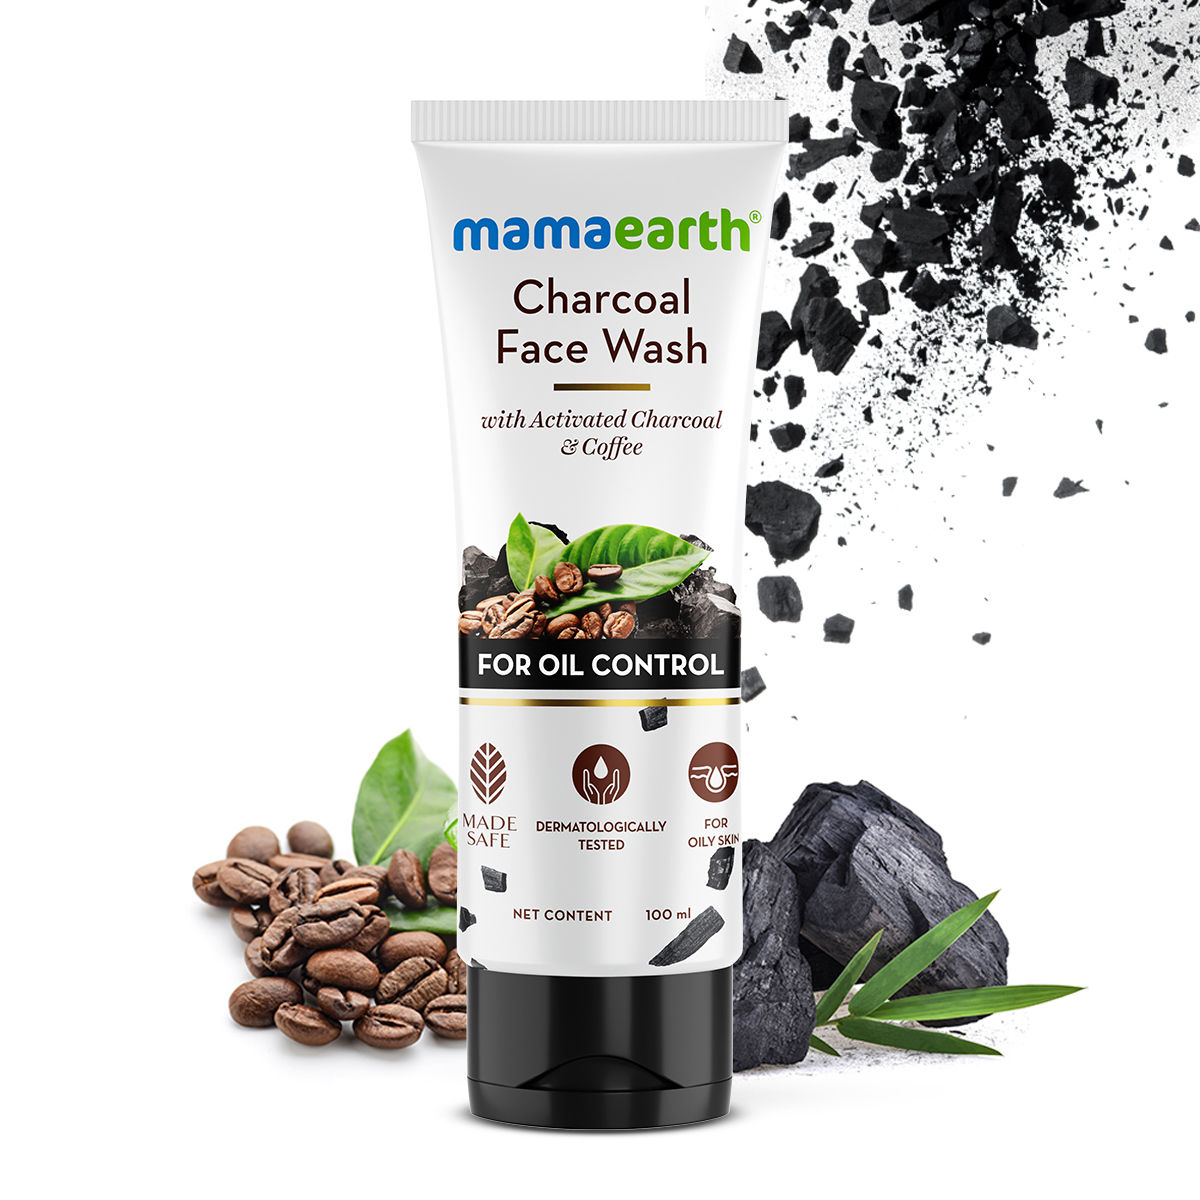 Buy Mamaearth Charcoal Face Wash with Activated Charcoal & Coffee for Oil Control - 100ml - Purplle